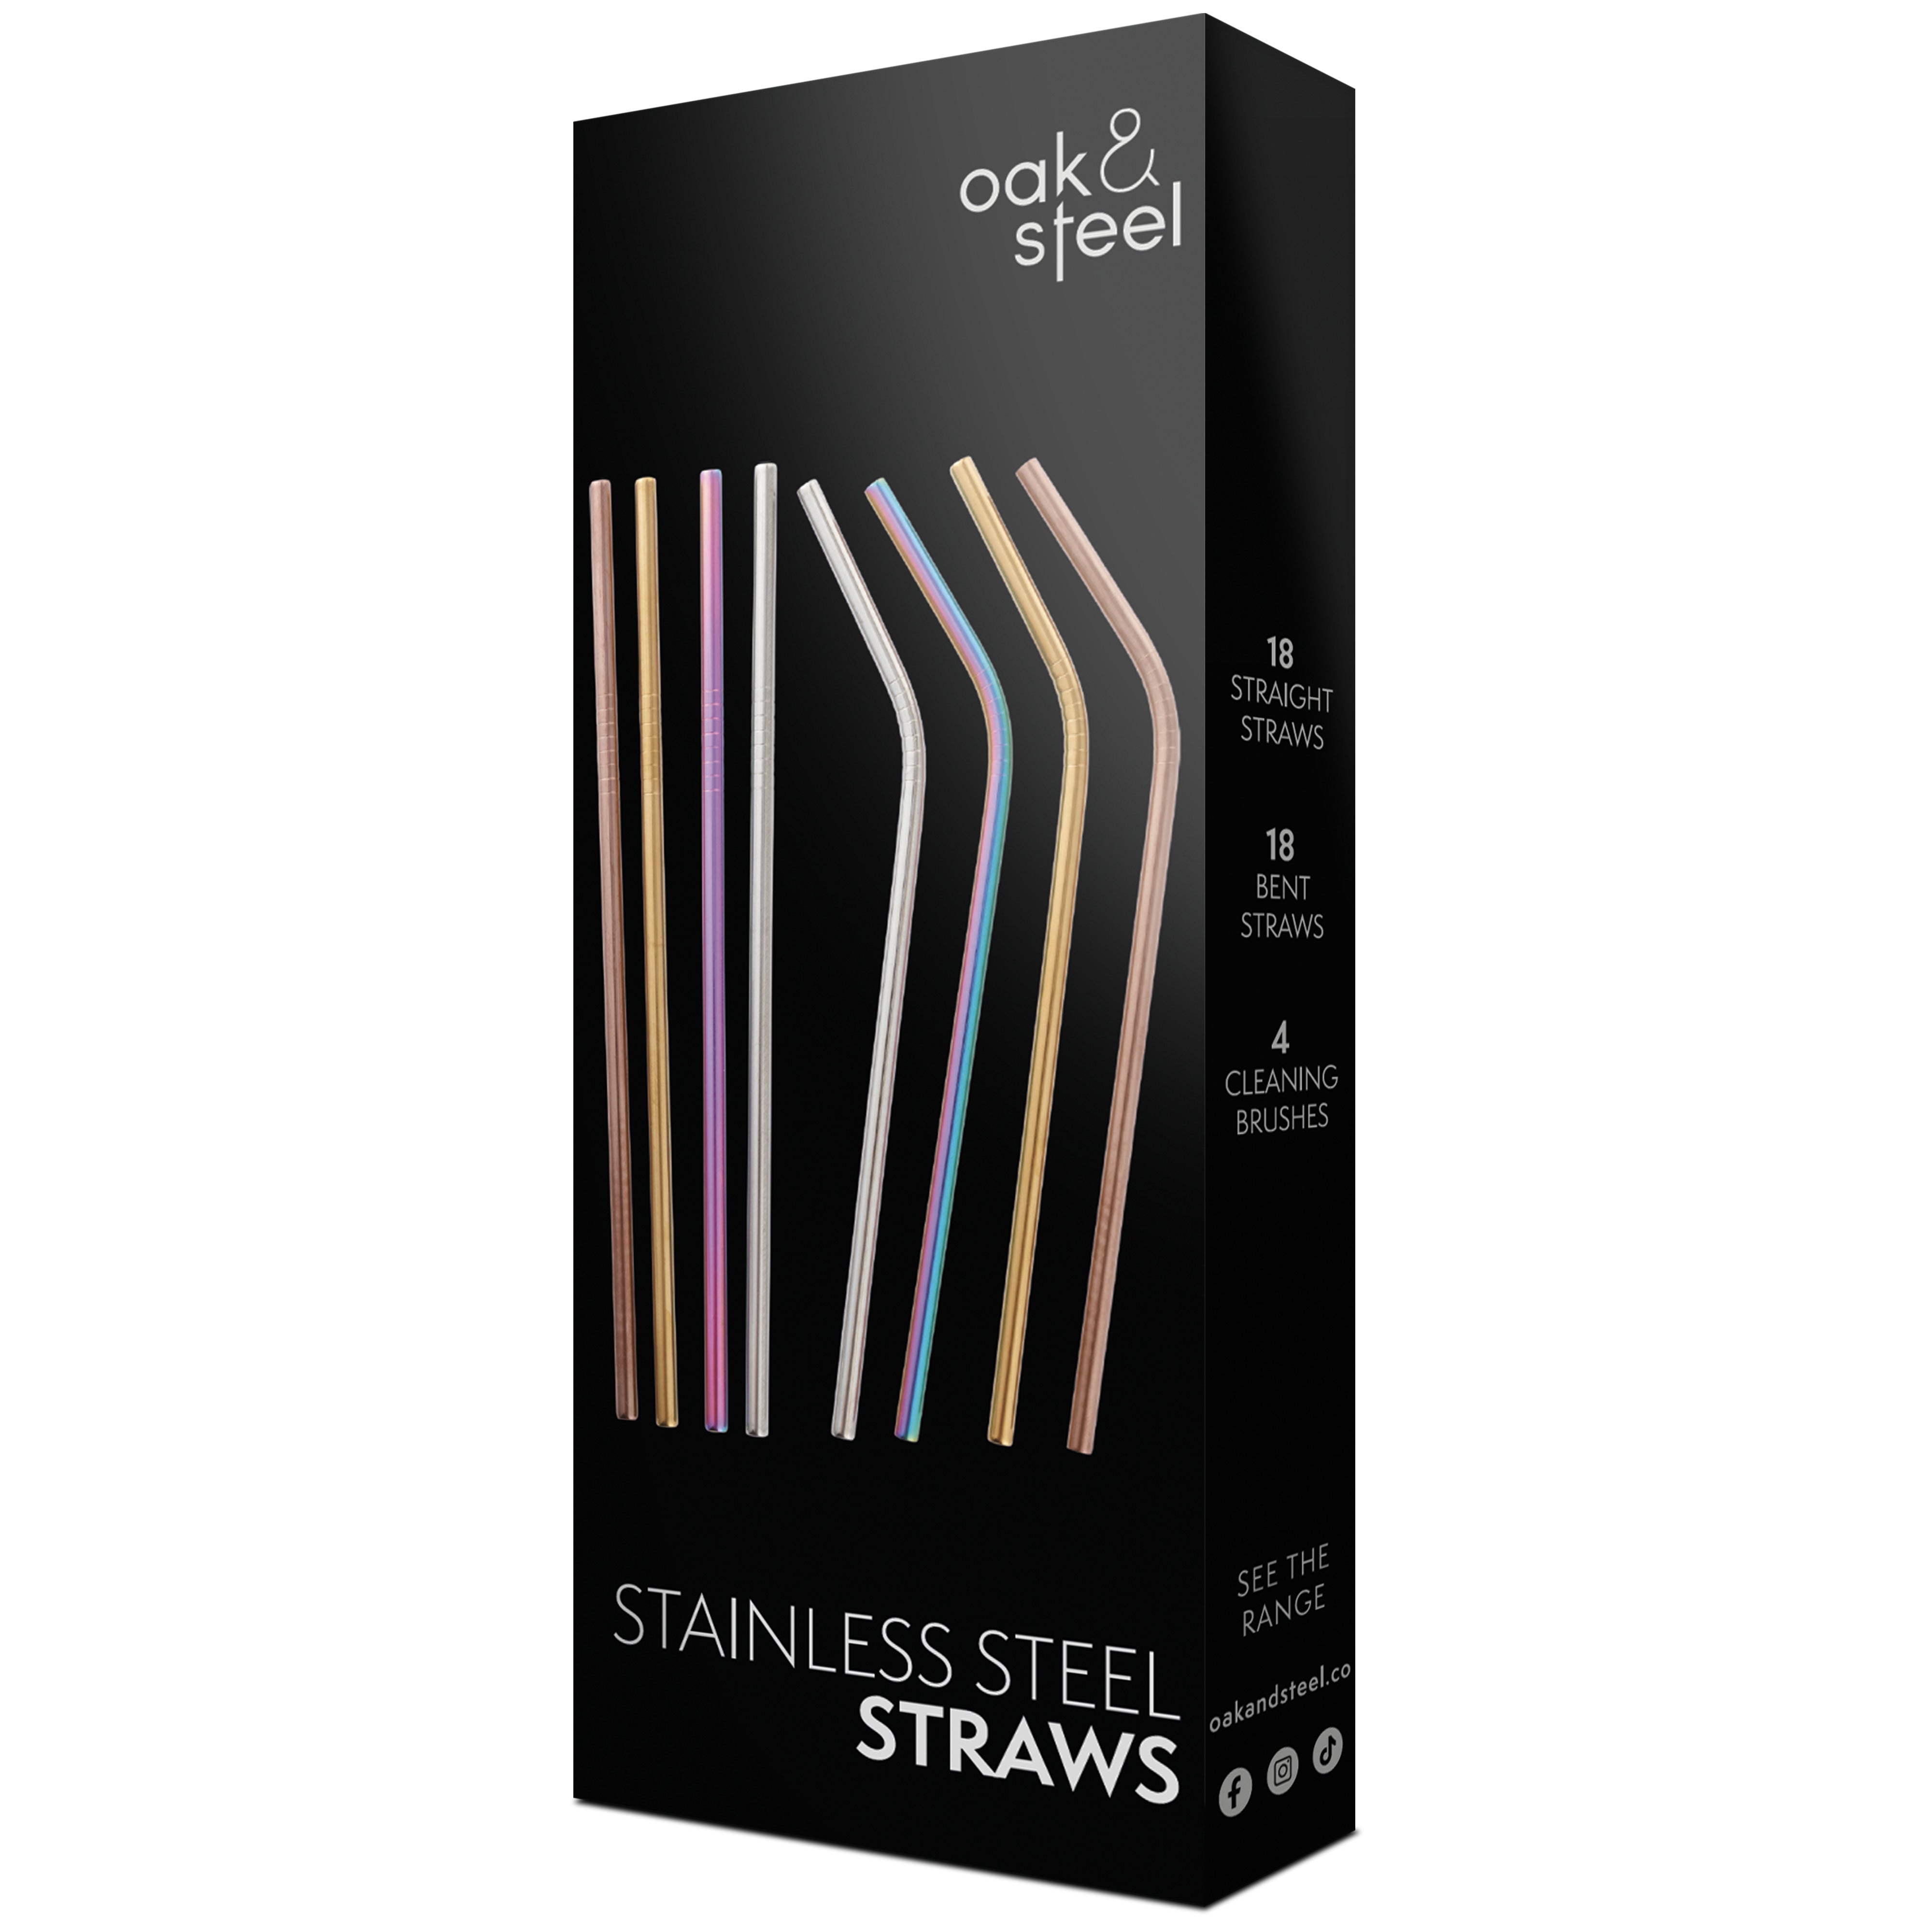 36 Stainless Steel Reusable Straws with 4 Brushes